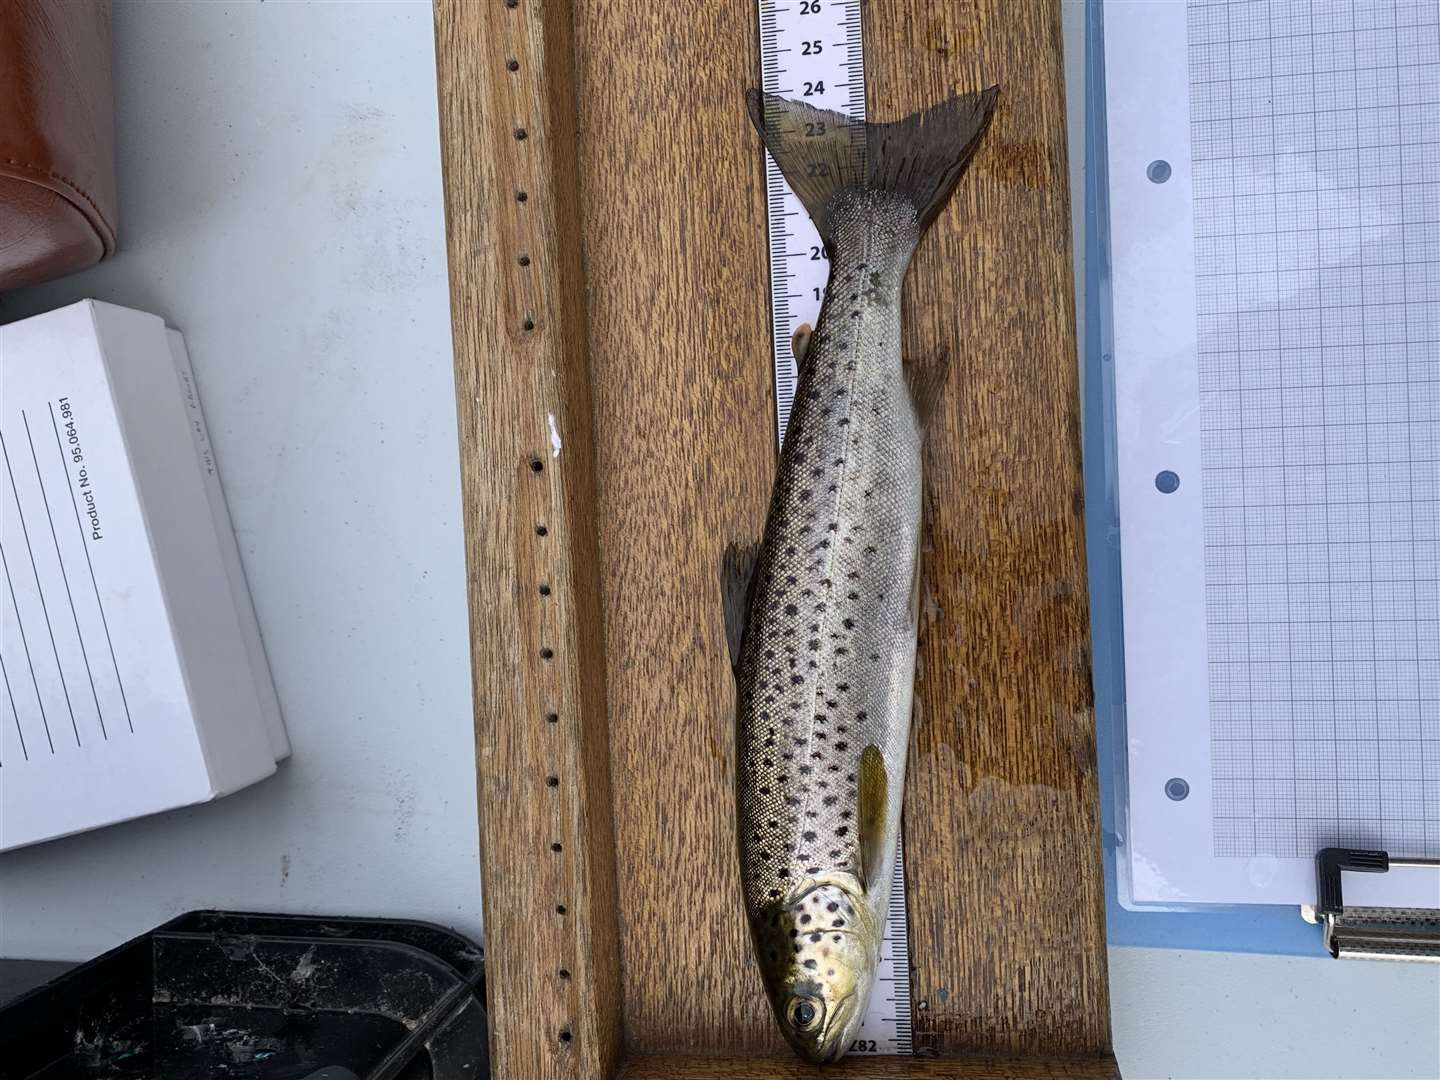 A brown trout being measured.